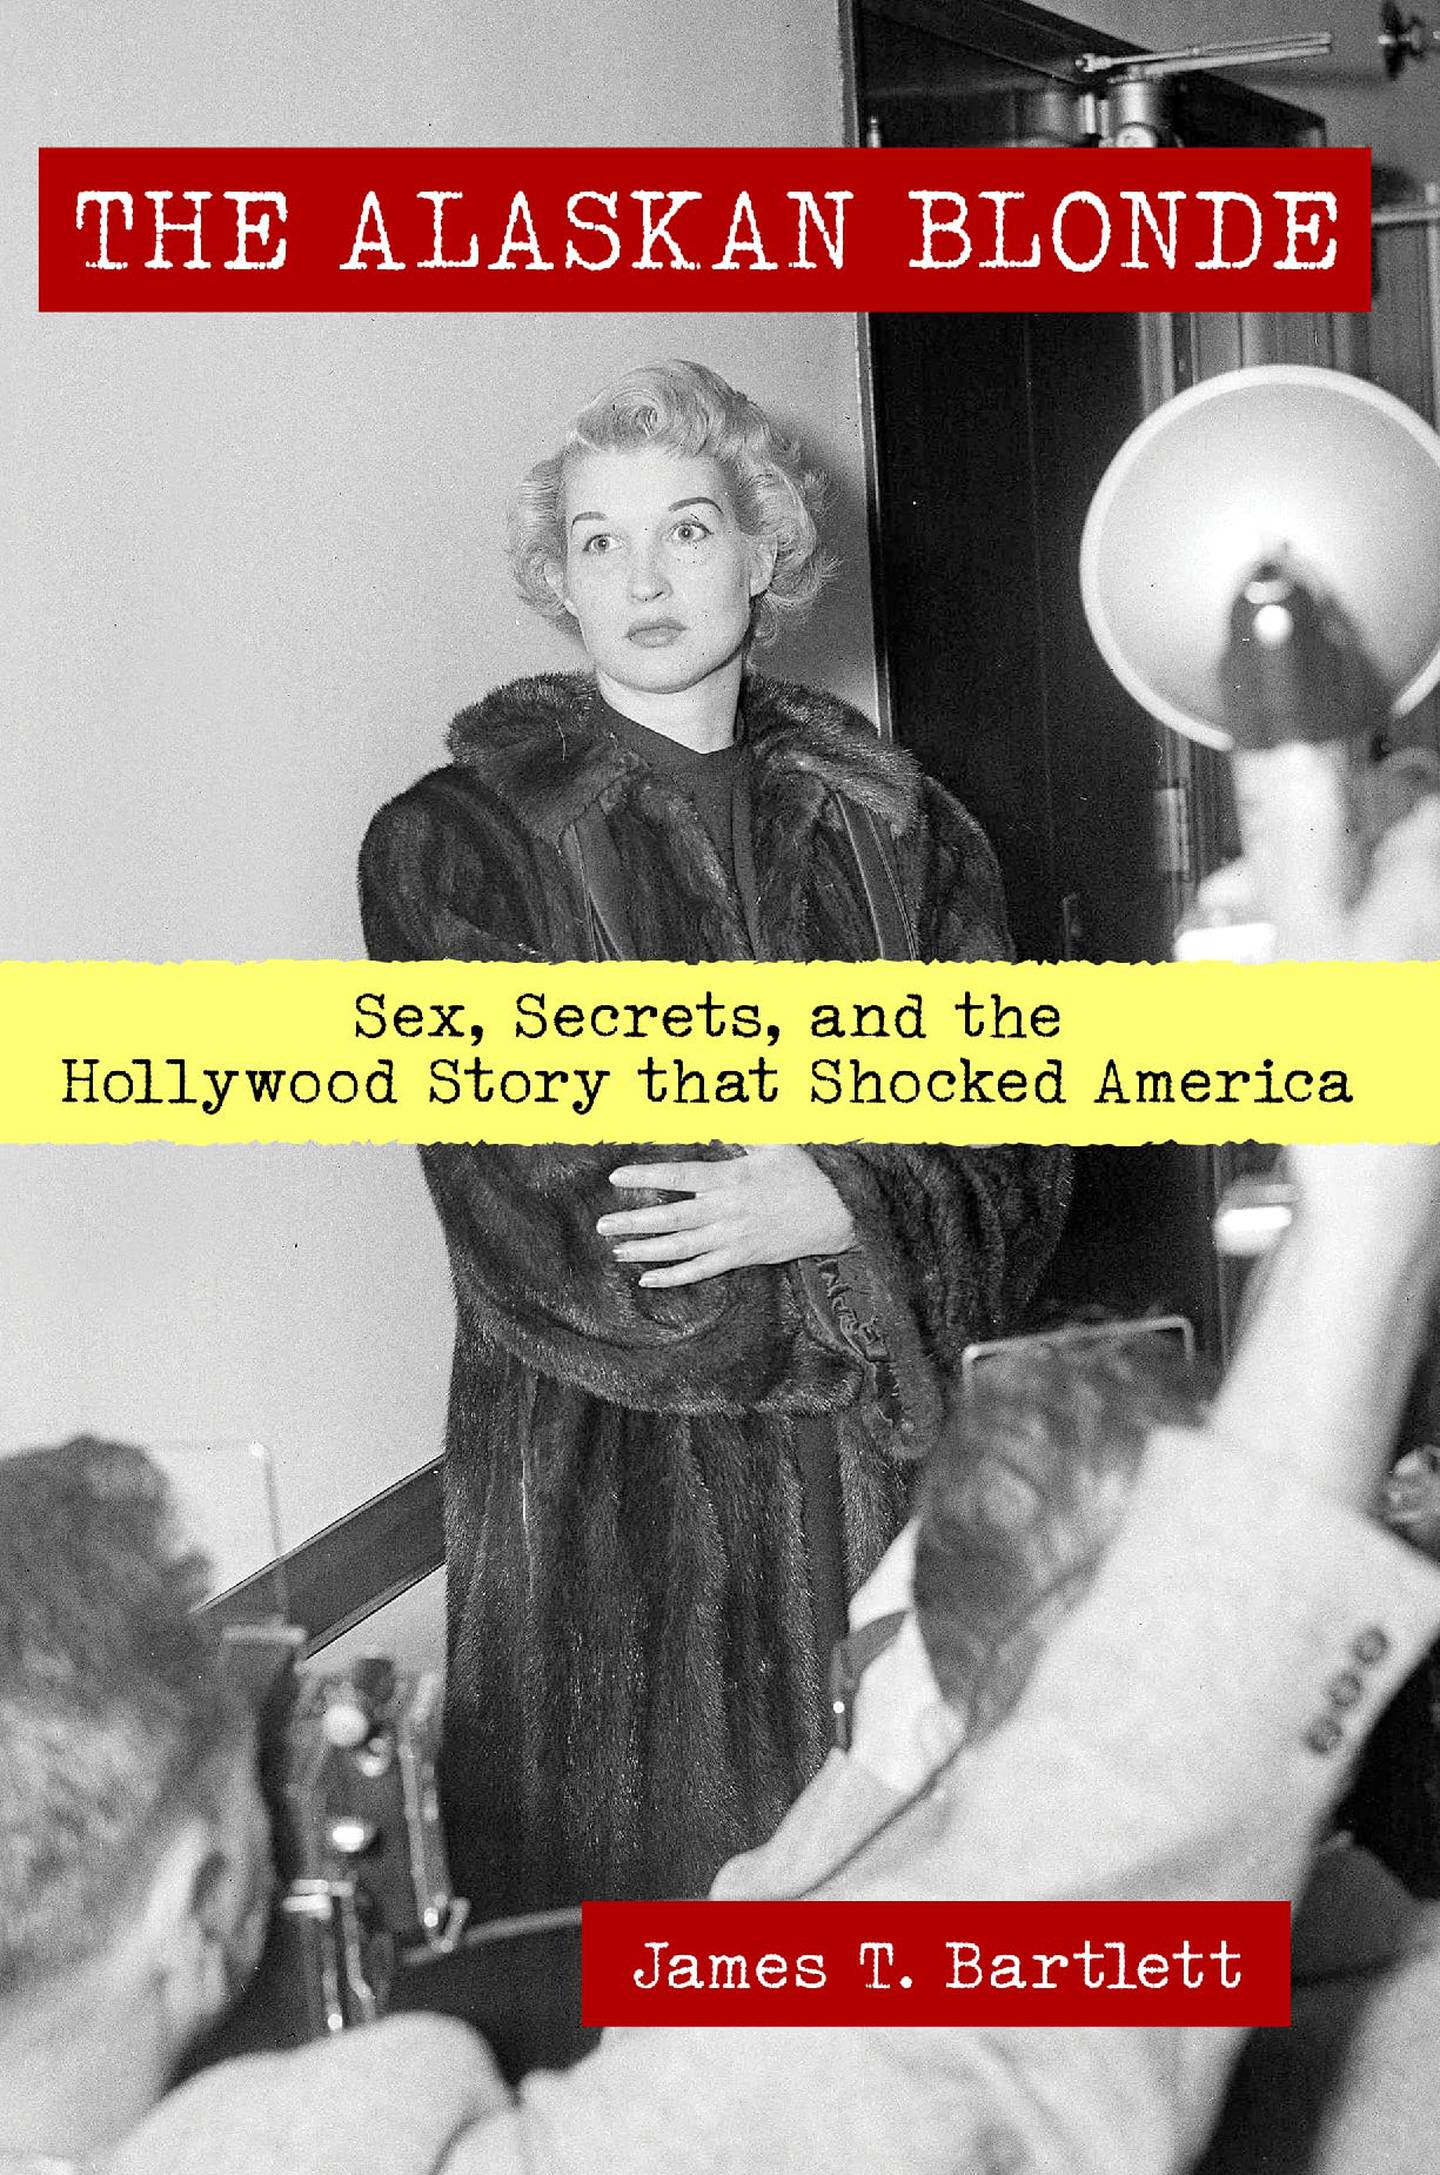 “The Alaskan Blonde: Sex, Secrets, and the Hollywood Story that Shocked America,” by James Bartlett